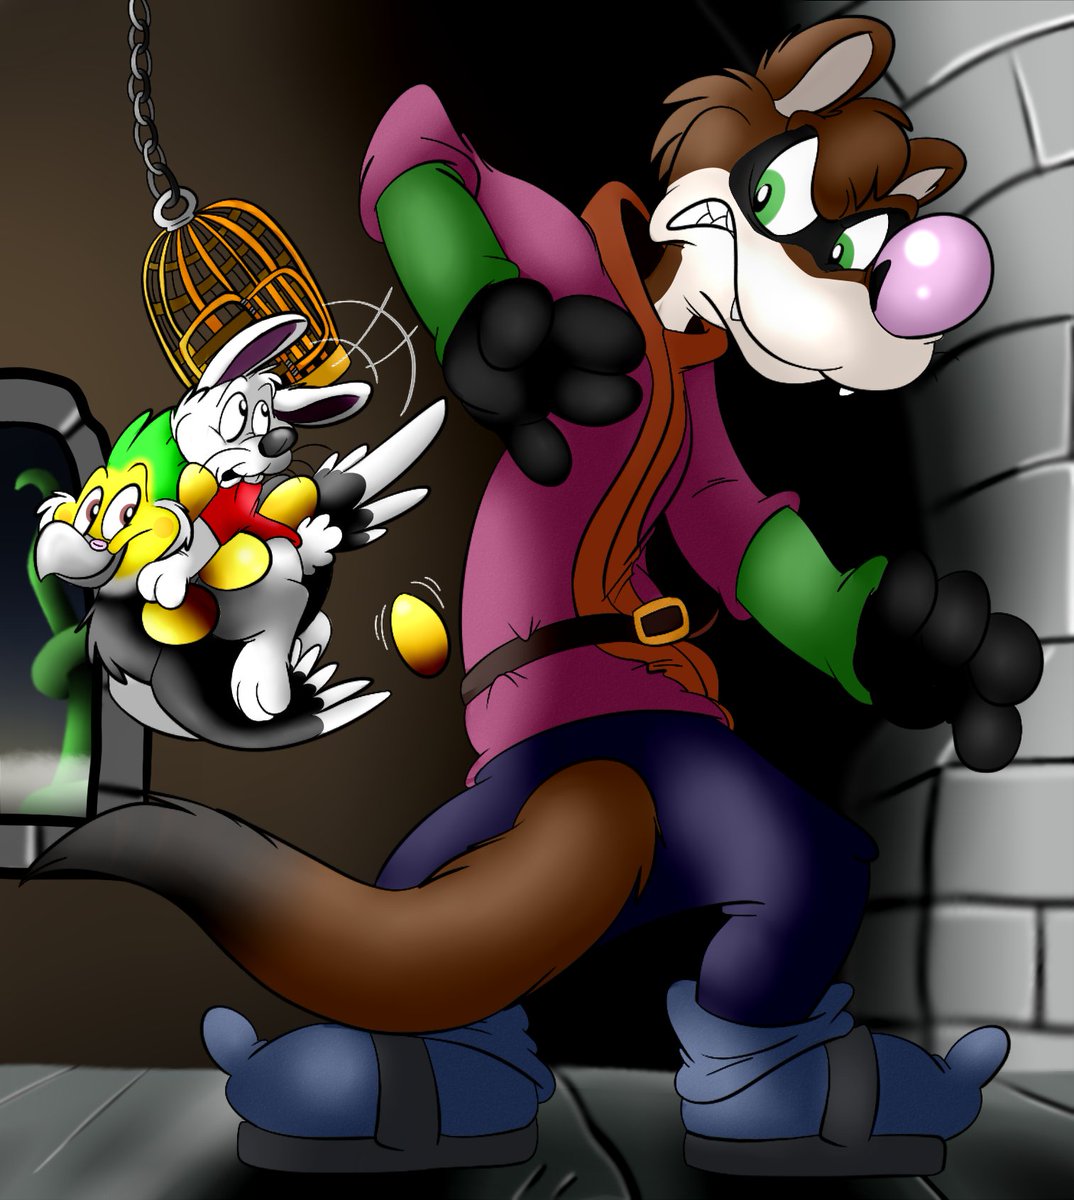 #AptoApril Day 12: Art? Well, maybe life imitating art, I guess? This one is tough... How about replicating somewhat of a scene from one of my favorite movies? Illas as Willie the Giant from Mickey and the Beanstalk! 🎨 @SpitzyTheClown 2014